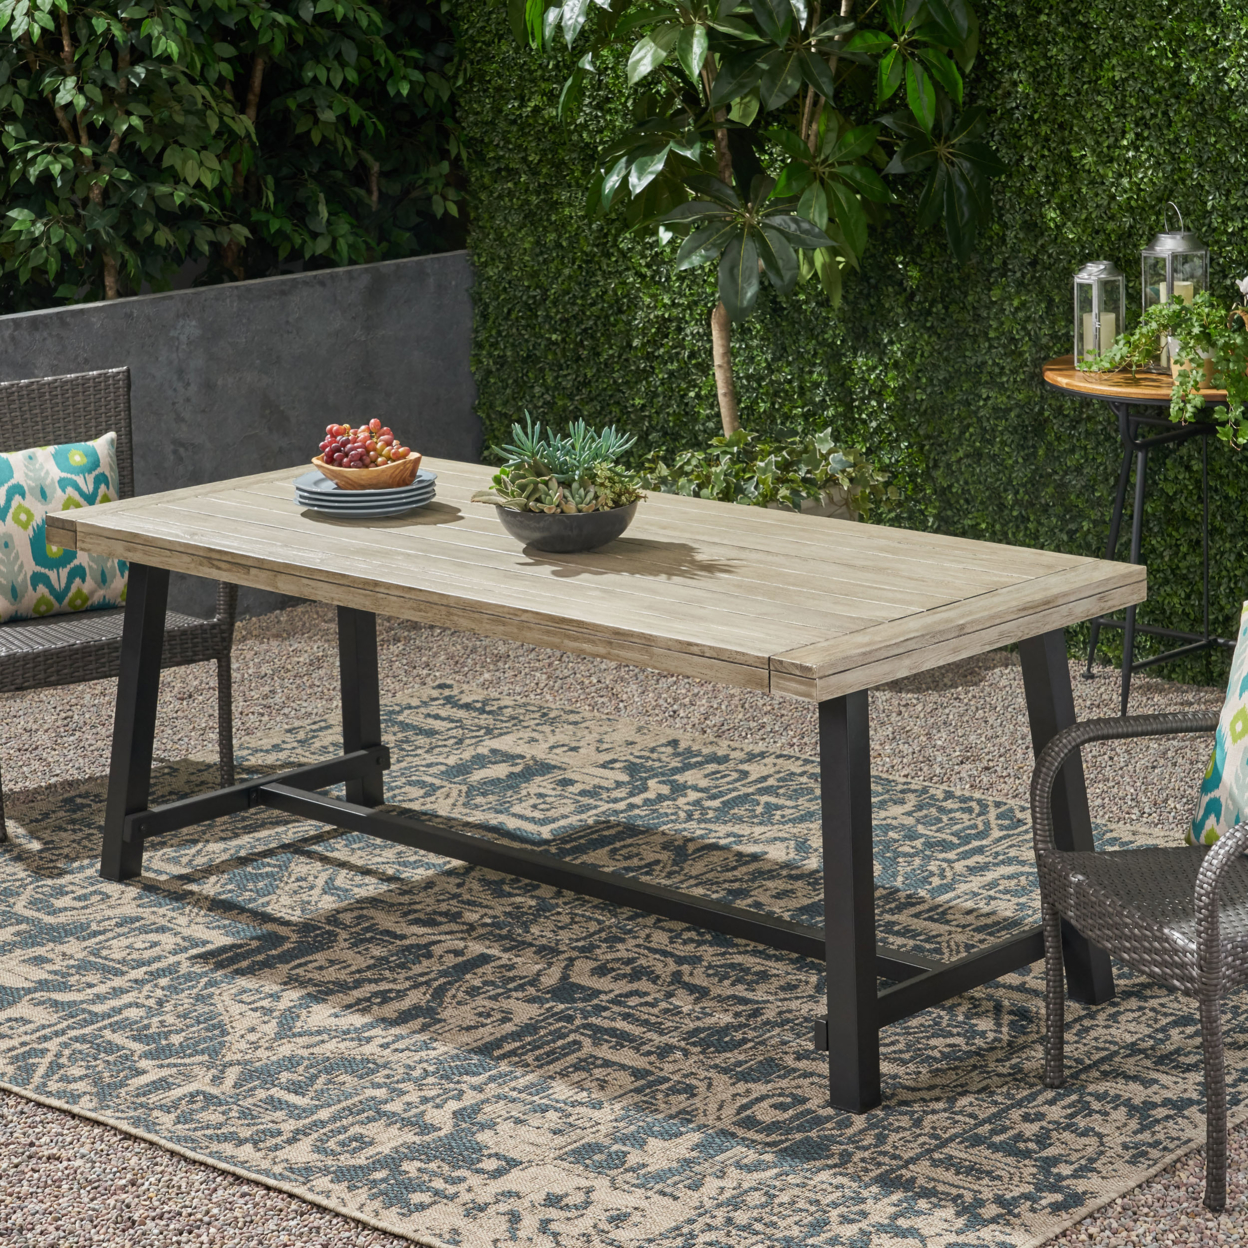 Beau Outdoor Eight Seater Wooden Dining Table - Light Gray Finish + Black Finish